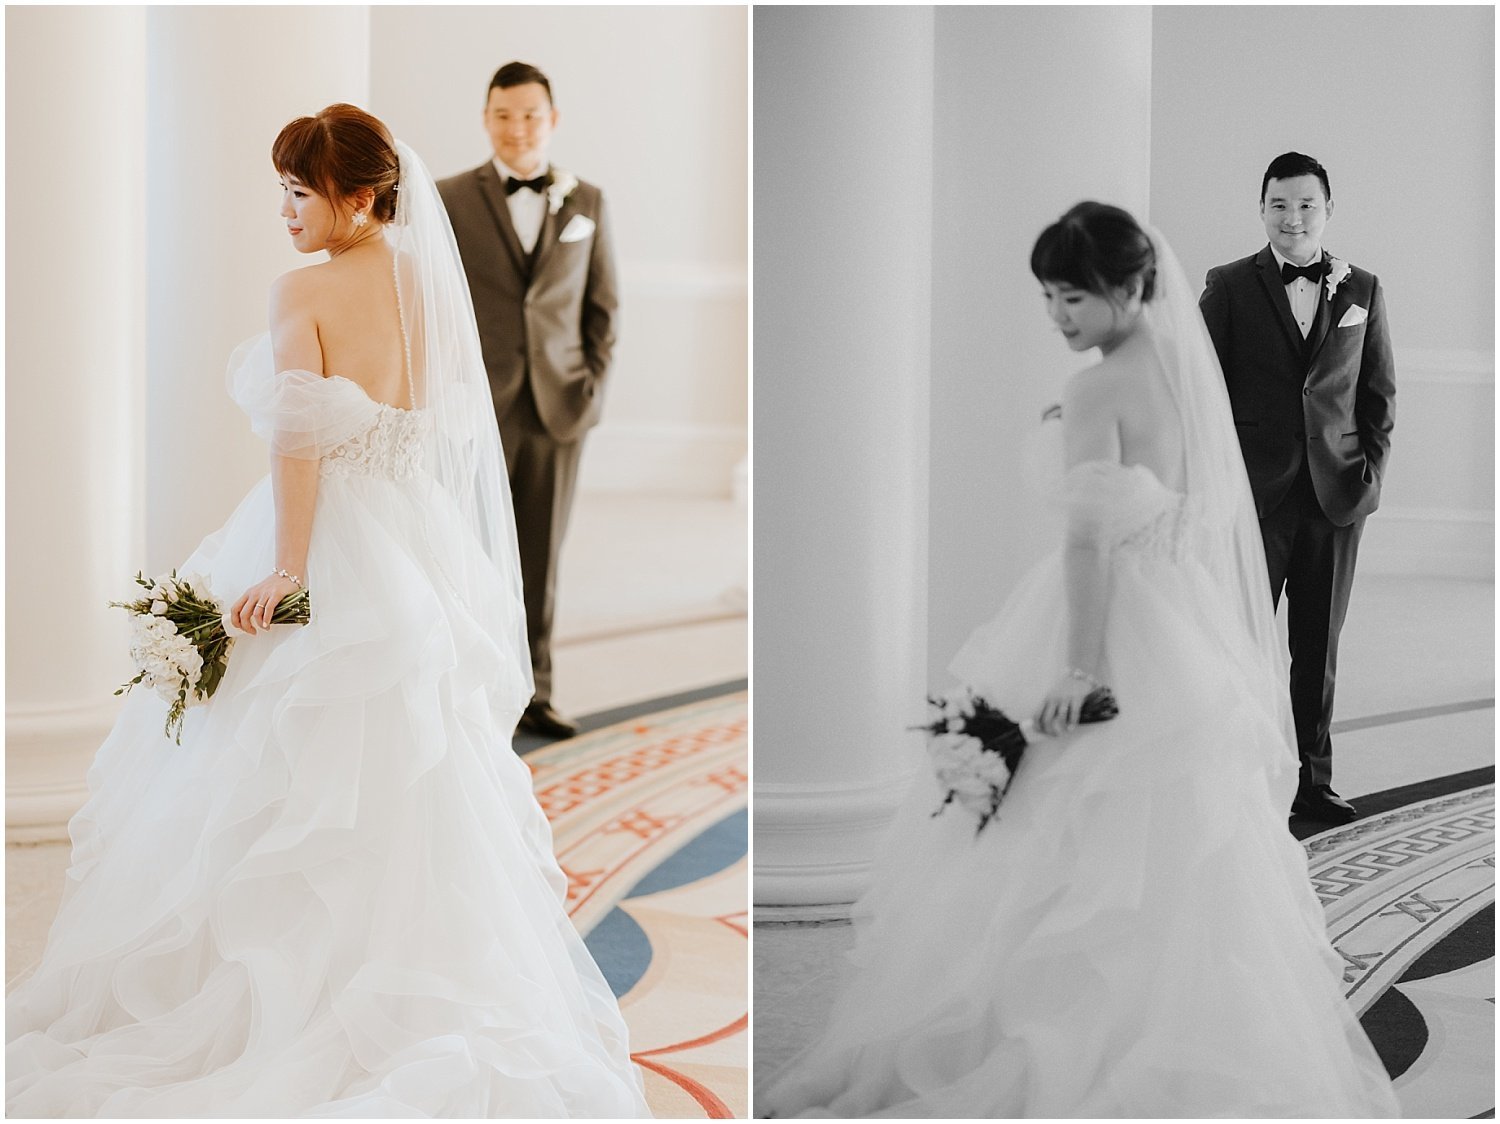 MULTICULTURAL COUPLE, CHINESE BRIDE, KOREAN GROOM, ASIAN COUPLE, CHINESE TRADITIONAL WEDDINGS, KOREAN TRADITIONAL WEDDINGS, ROMANTIC COUPLE, PEACHTREE ROAD UNITED METHODIST CHURCH